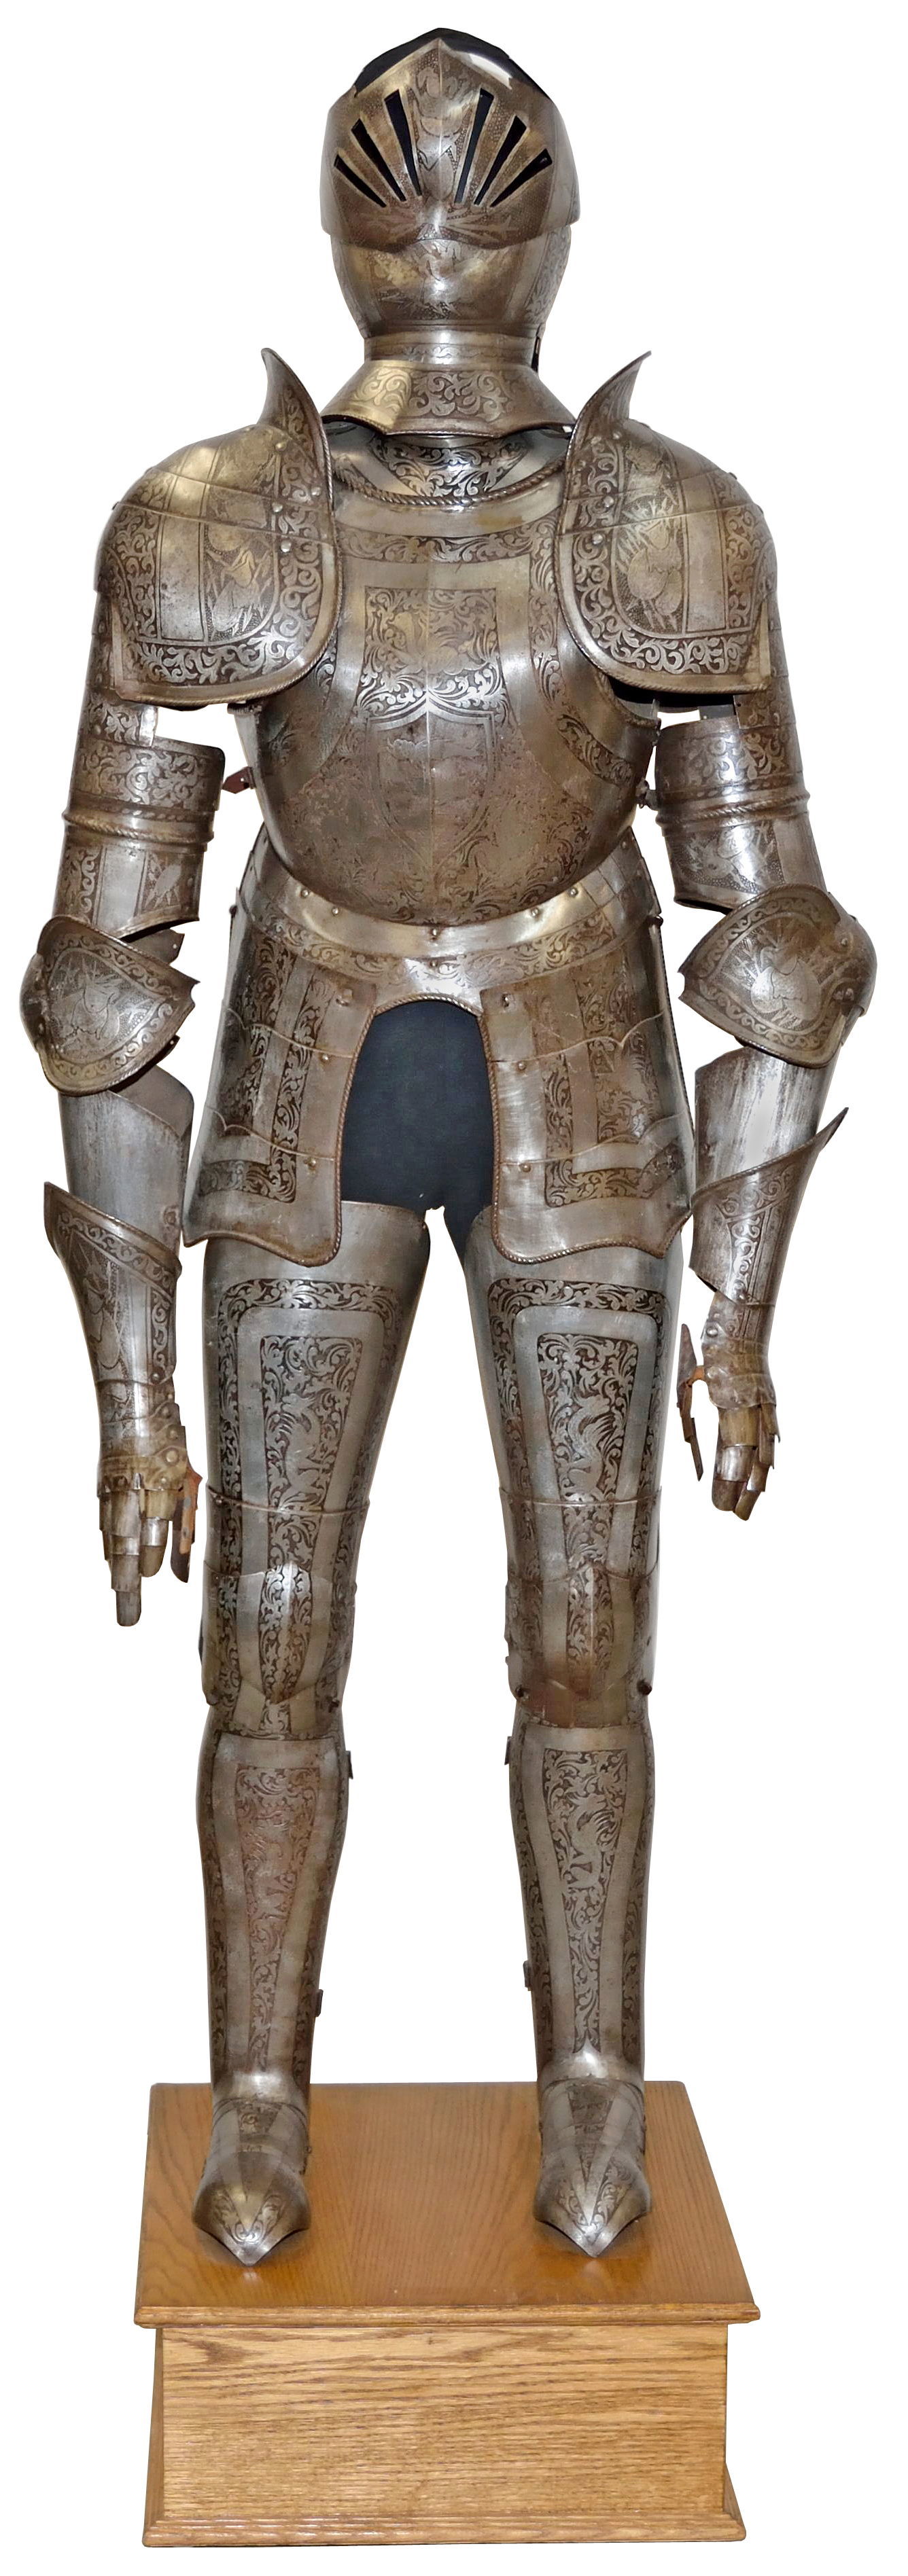 A suit of armor might be a strange thing to display today but this copy of a suit of plate armor sold for $2,115 at a Poulin Antiques & Auctions, Inc. auction in March 2016 in Fairfield, Maine.